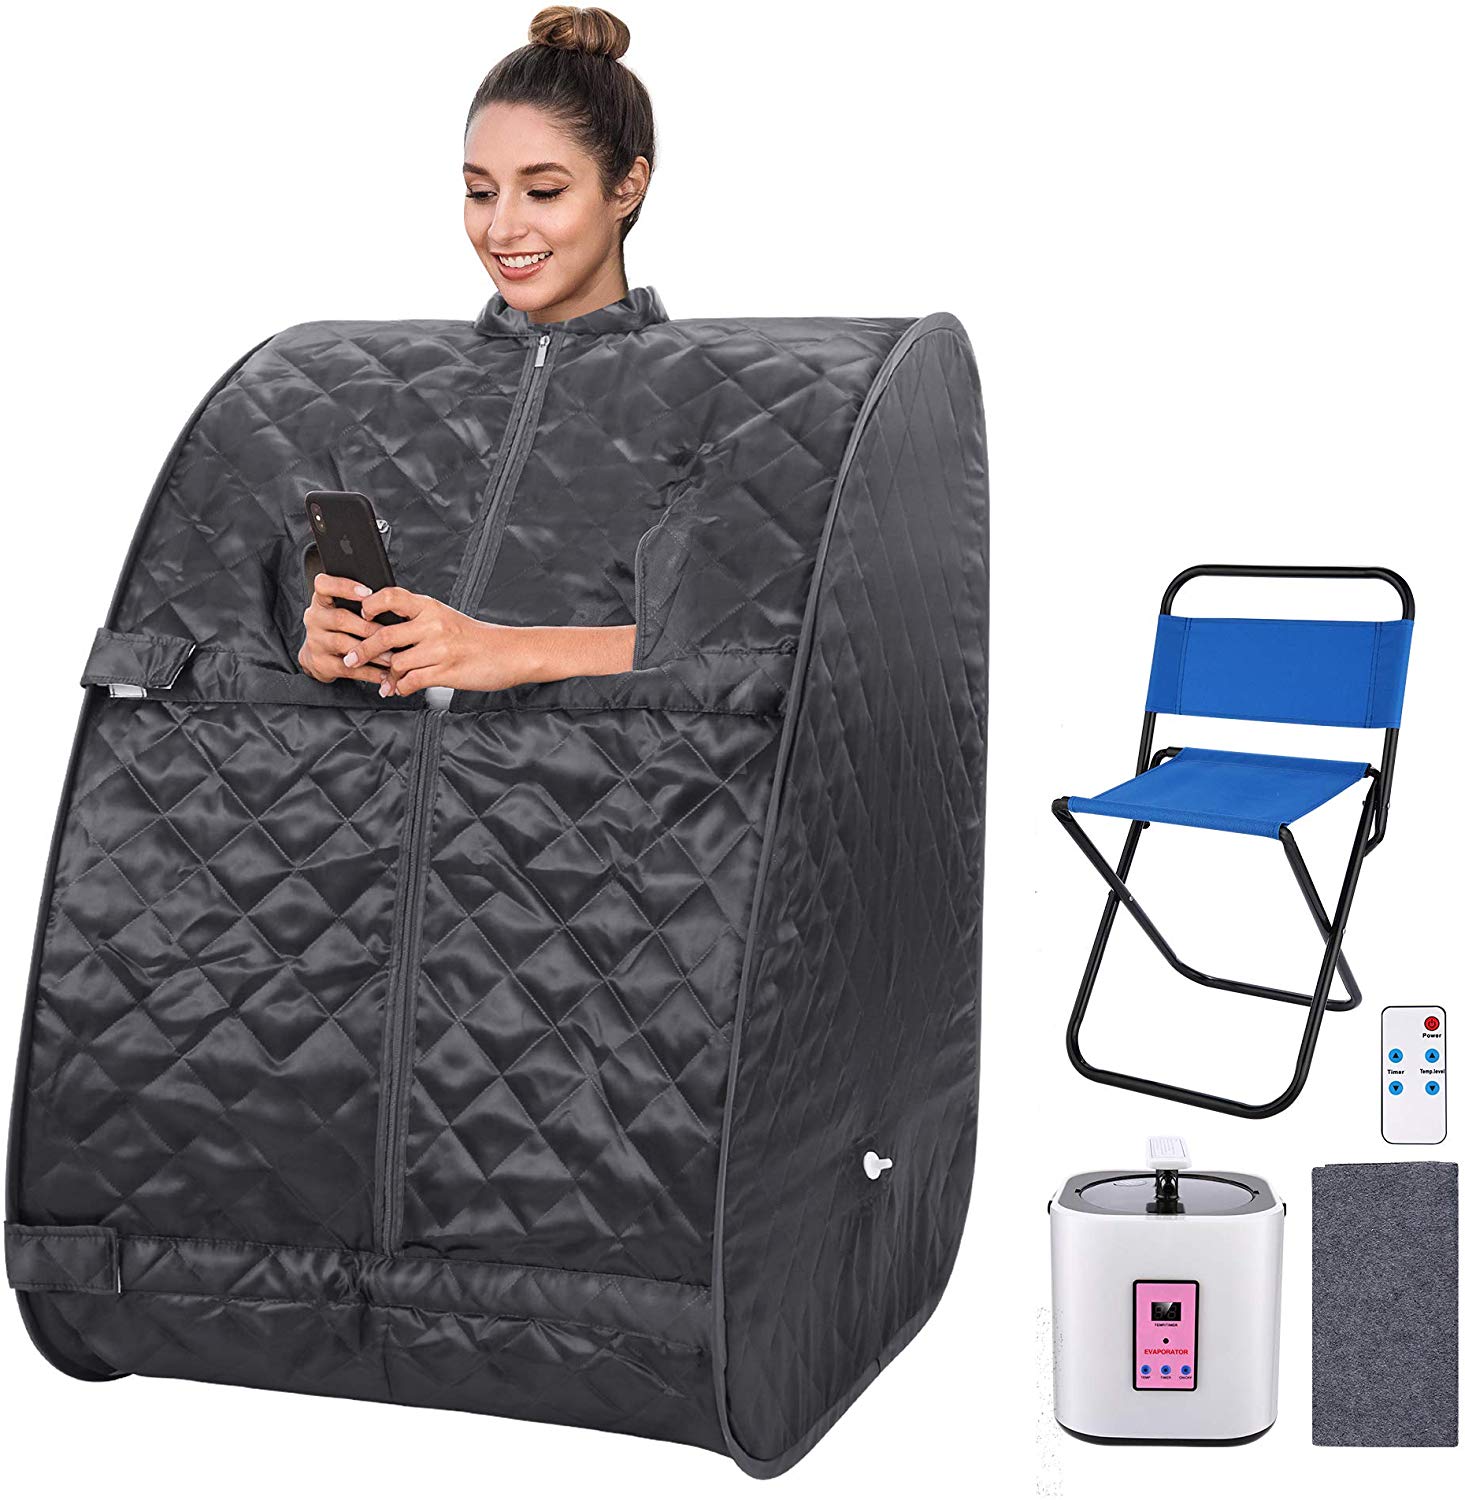 Review of OppsDecor Portable Steam Sauna Spa,One Person Sauna with Remote Control